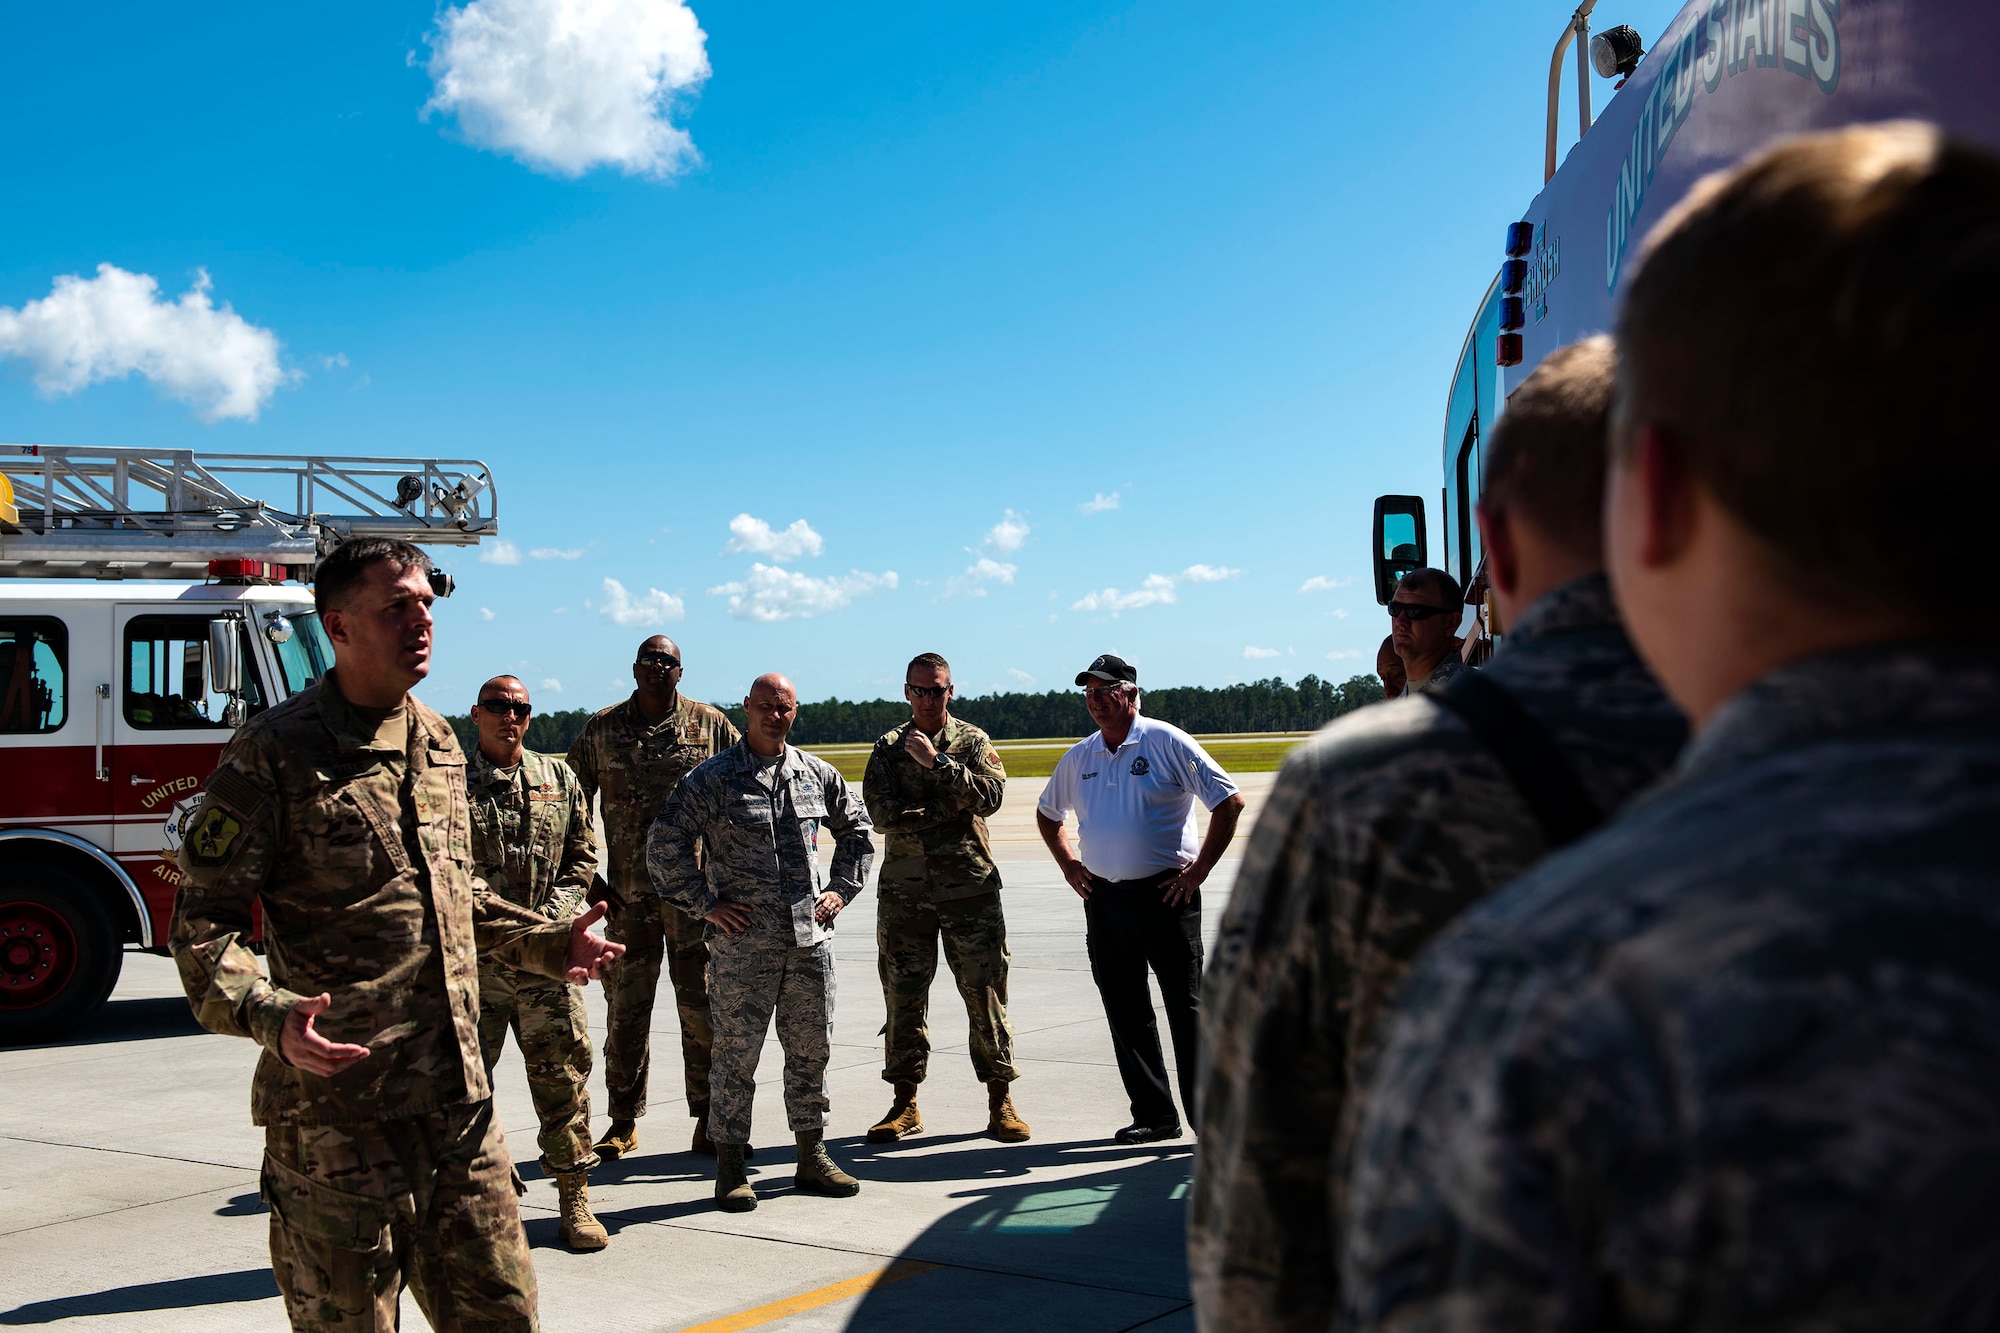 Col. Daniel P. Walls, 23d Wing commander, speaks to Airmen from the 23d Civil Engineer Squadron Sept. 23, 2019, at Moody Air Force Base, Ga. Walls proclaimed the week of Oct. 6-12 as Fire Prevention Week, which is designed to commemorate the sacrifices of our firefighters and teach fire safety to others. (U.S. Air Force photo by Senior Airman Erick Requadt)